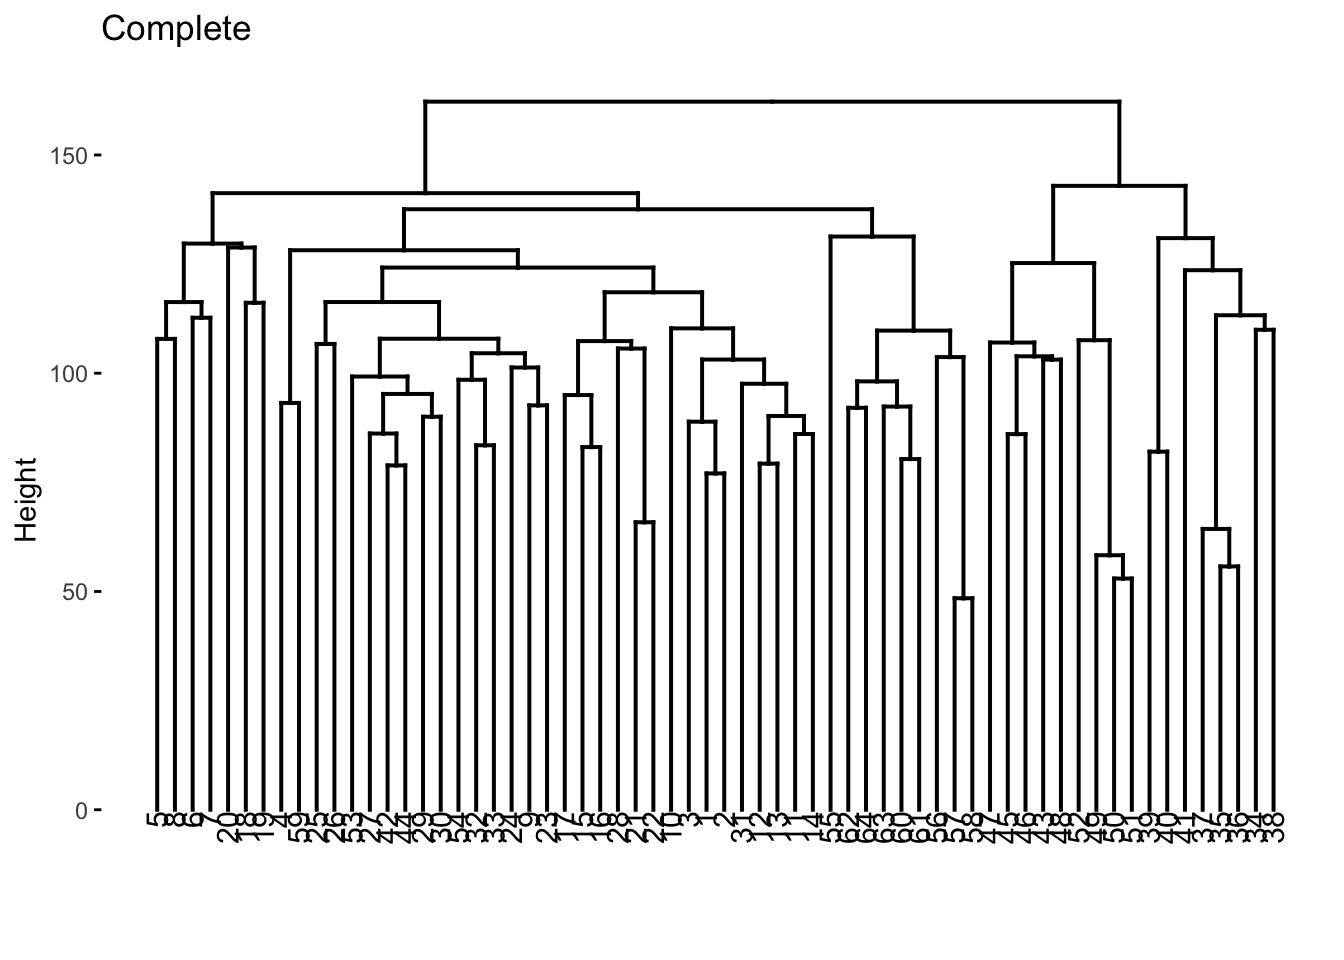 Dendrogram visualization. Not colored, has most of the splits happen at larger hights.